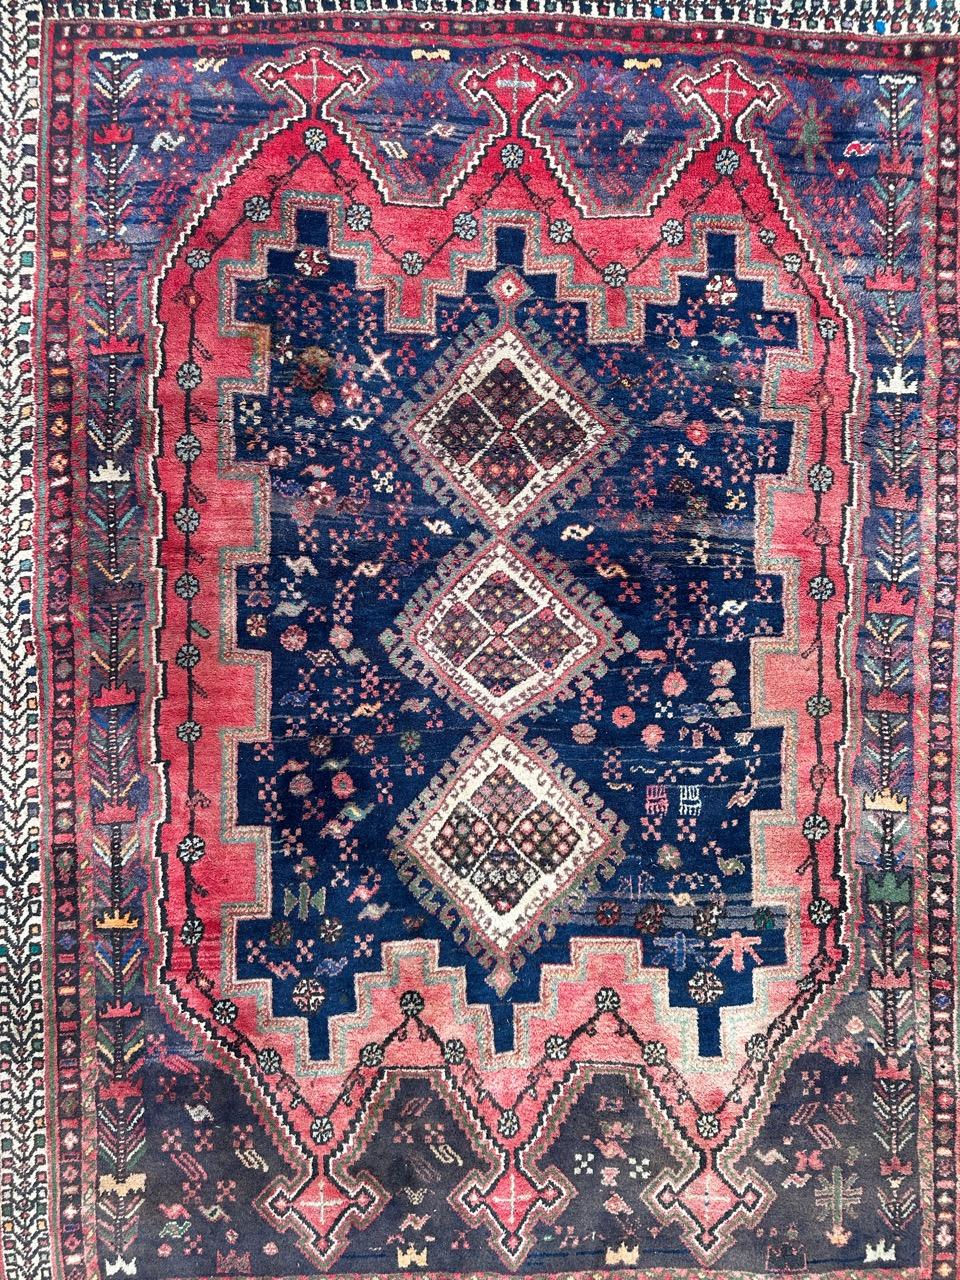 This exquisite handwoven Afshar rug features a stunning decorative and geometric design. At its heart, you'll find three successive diamond-shaped medallions on a pristine white background, each adorned with elegant brown stylized floral patterns.